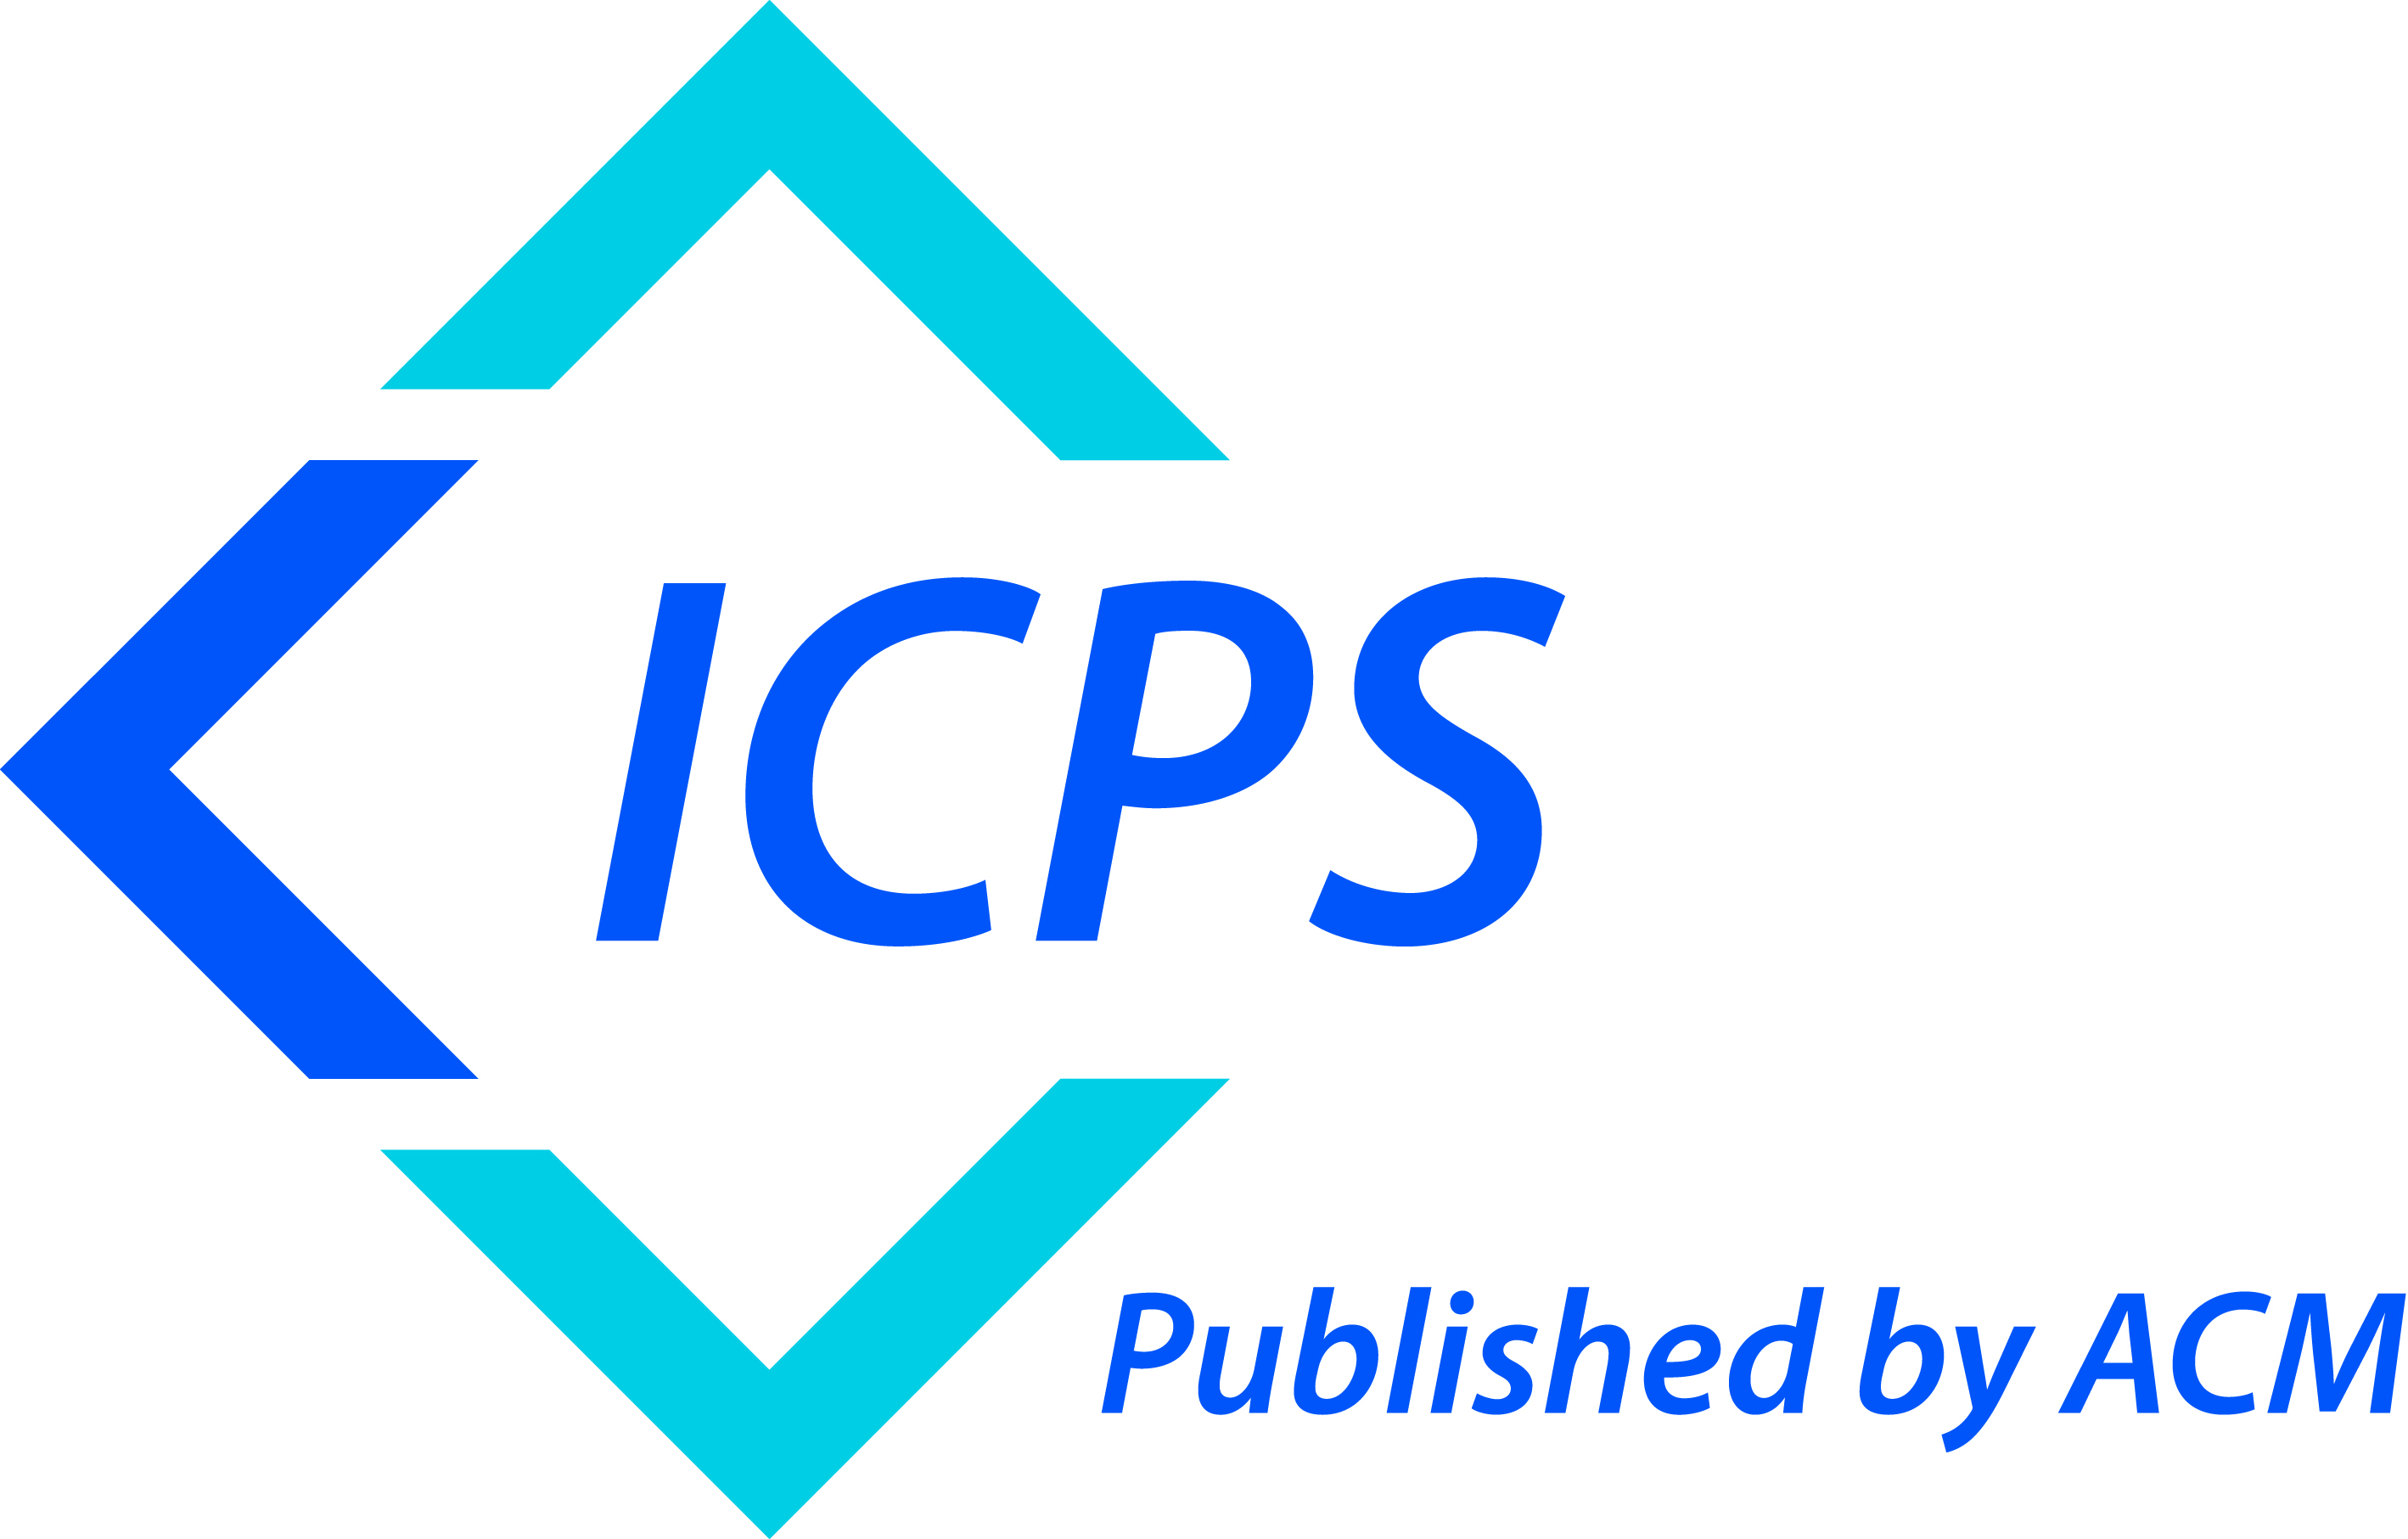 Published by ACM ICPS